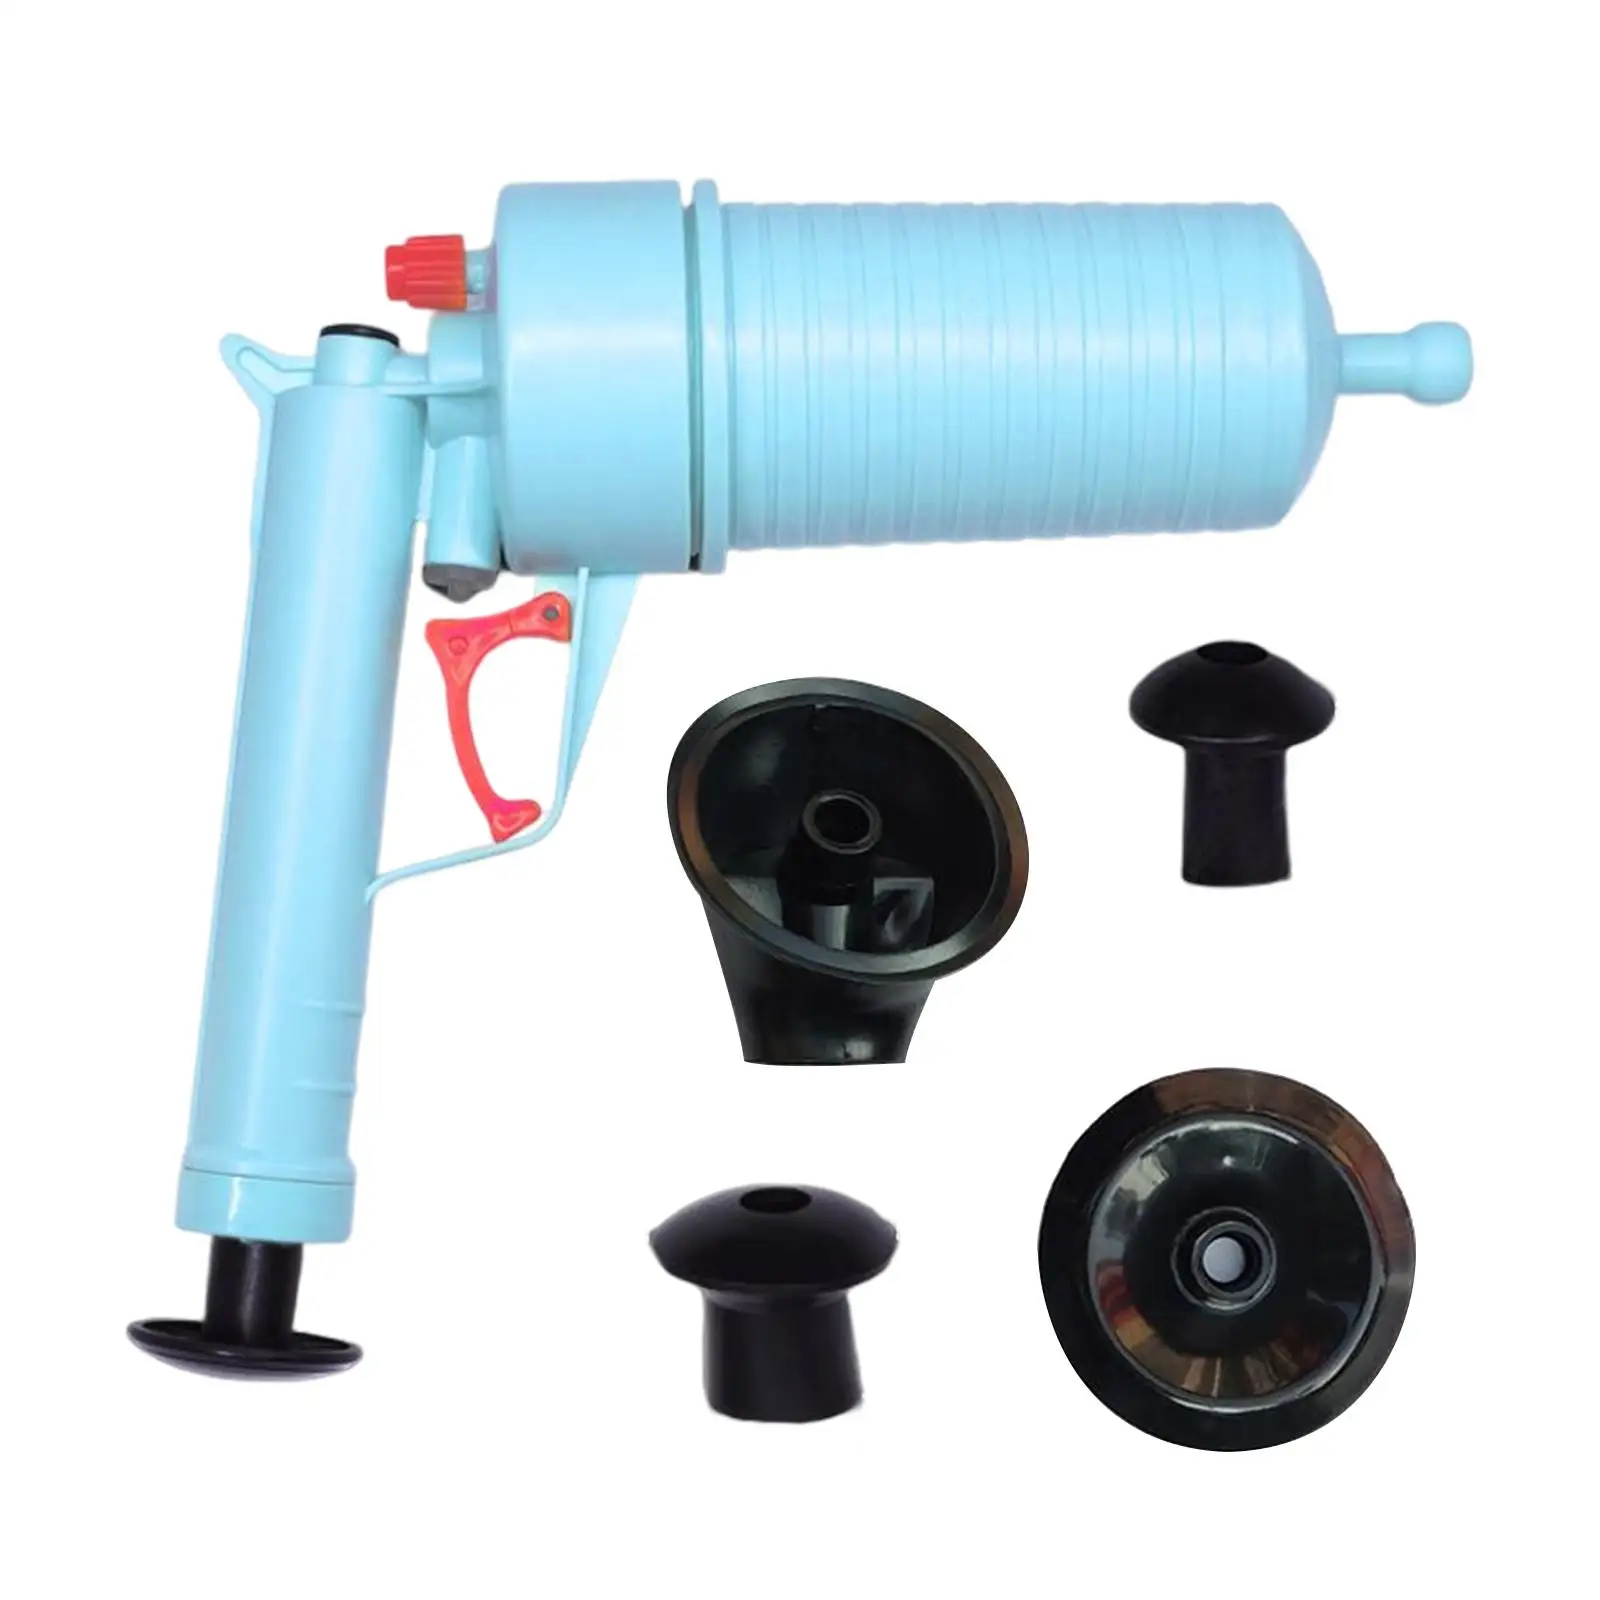 Multi Purpose Toilet Plunger Tub Drain Cleaner Opener with 4 Sized Suckers Large Cylinder Design